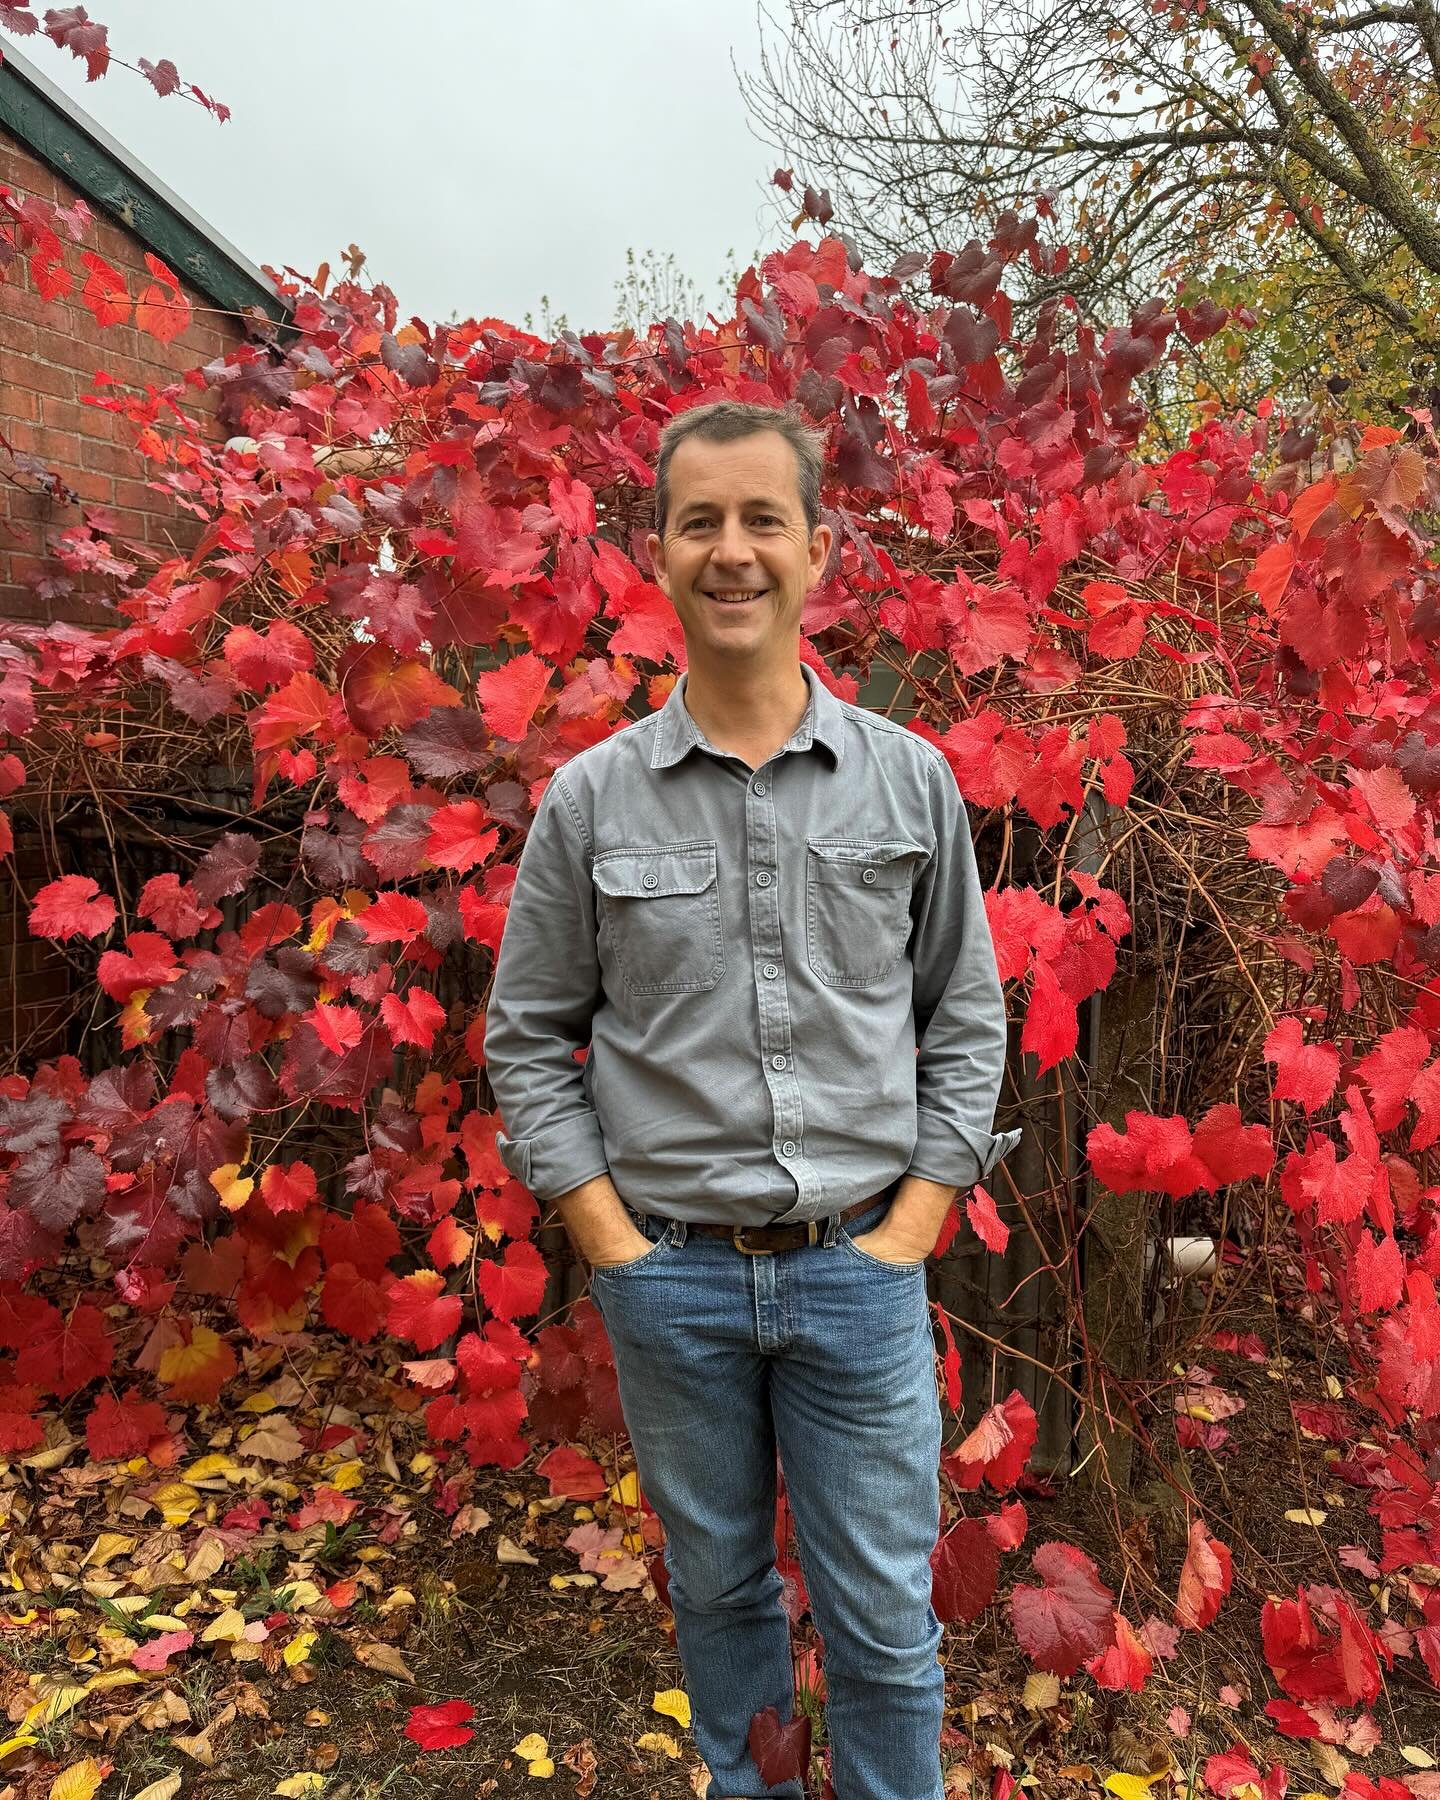 The SA Spring Garden Festival will be here before we know it and we wanted to introduce to you one of our guest speakers. This is Sam Luke from @balhannahnurseries and he will be joining us for an interactive session on pruning and answering your que